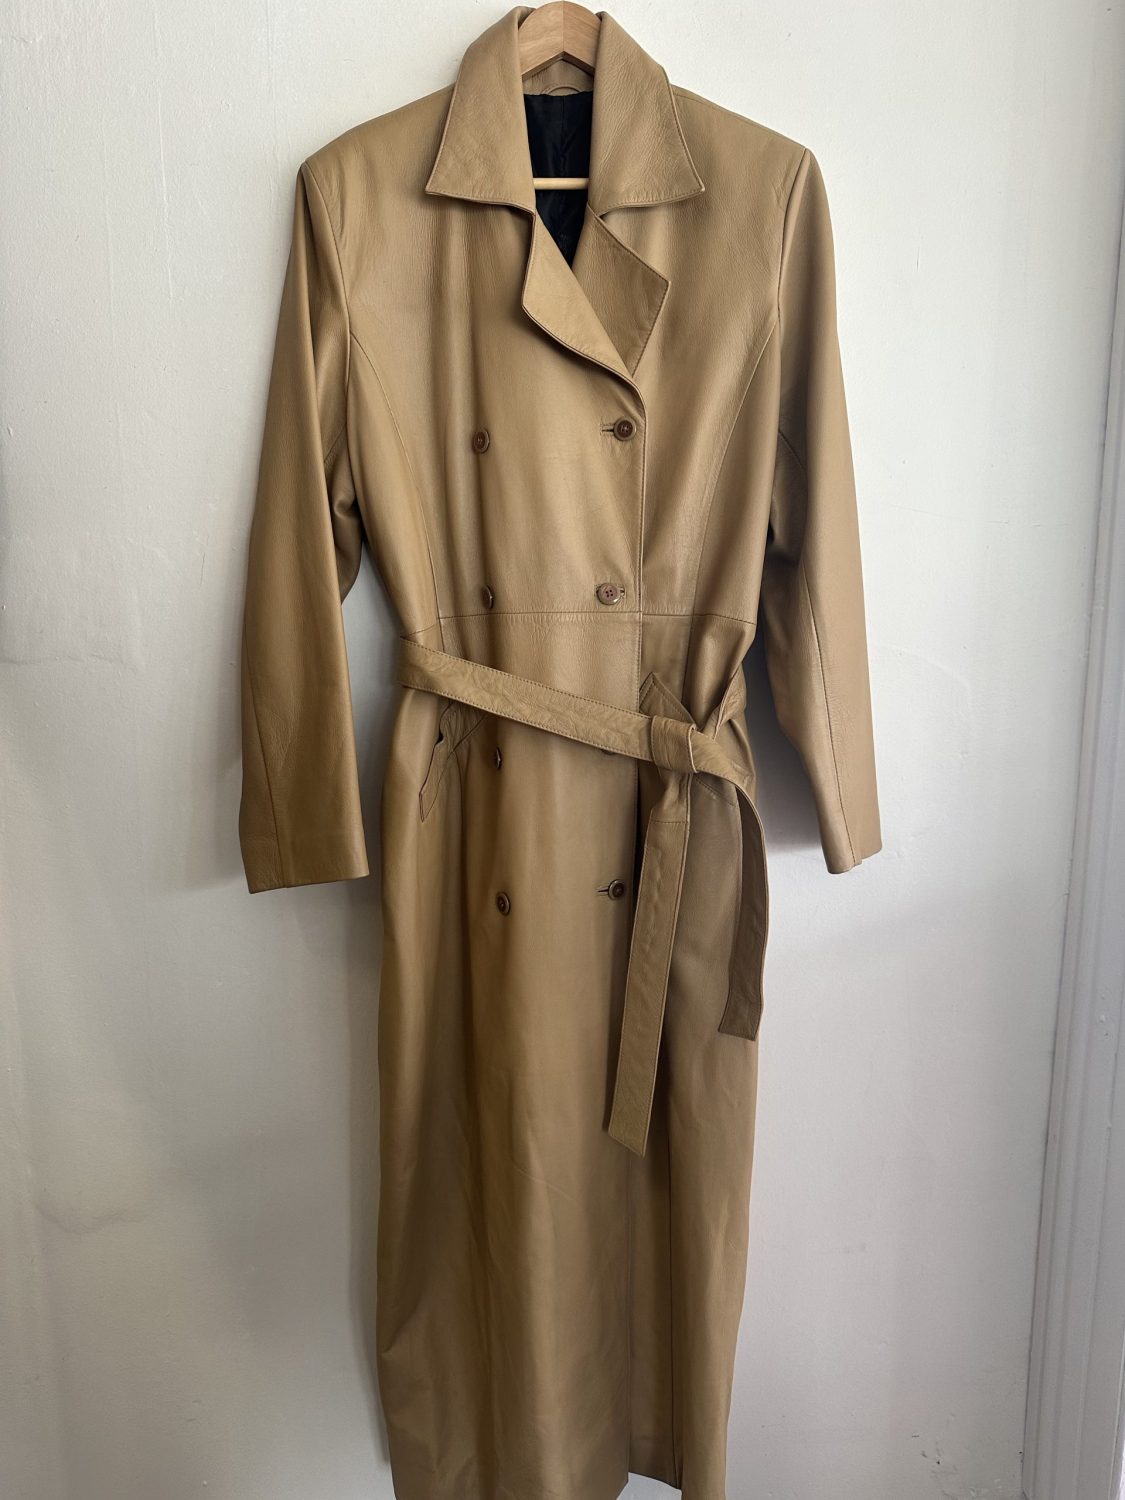 EXTRA LONG VINTAGE BEIGE LEATHER 'DORMEUIL' COAT FROM ENGLAND | Chaos ...